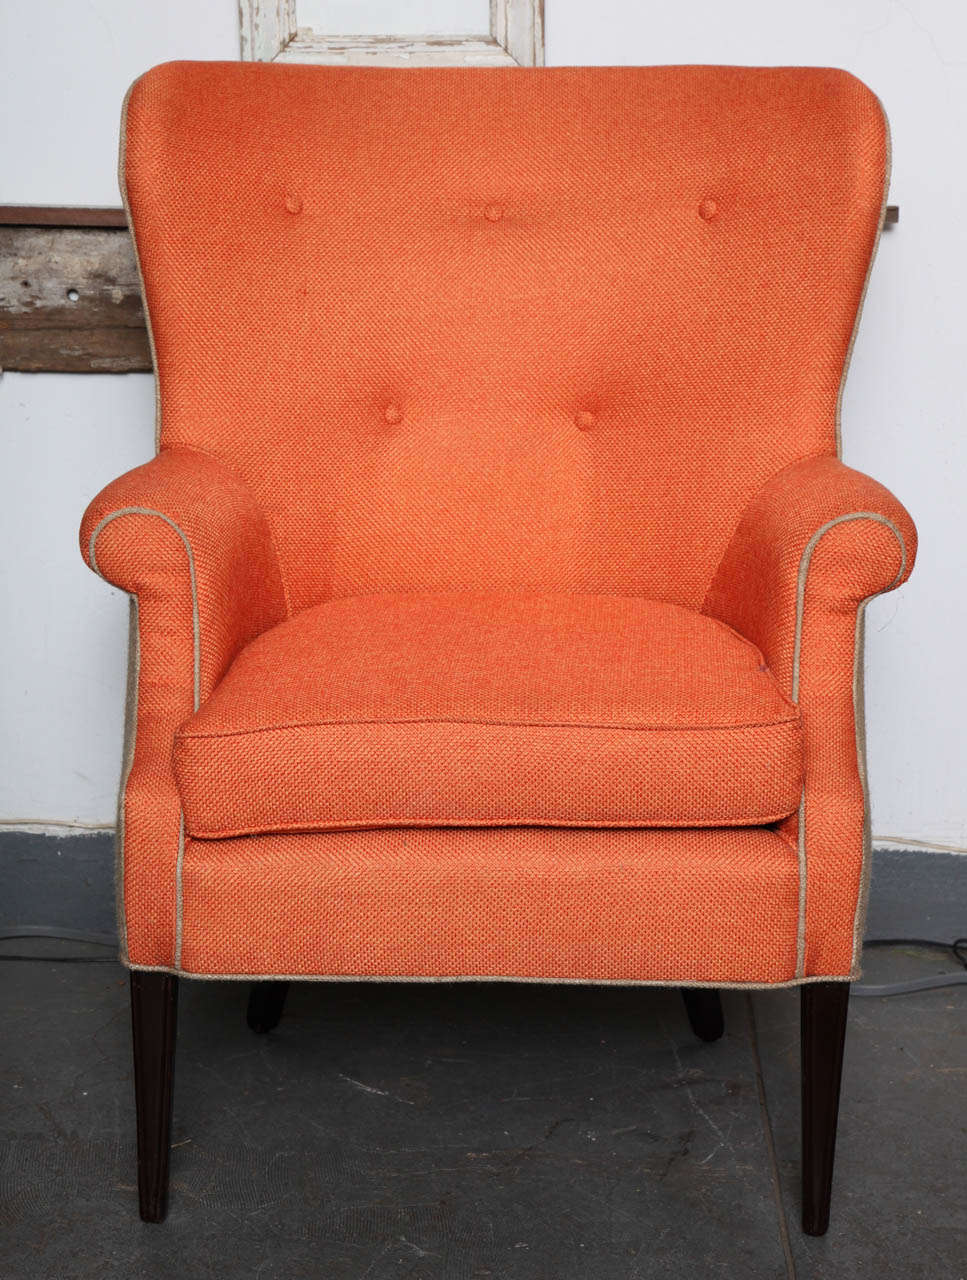 This Scandinavian Wingback chair was updated with jute fabrics in the front in orange and in the back in neutral color. It has its original solid mahogany legs and was updated keeping its originally designed tufted back.